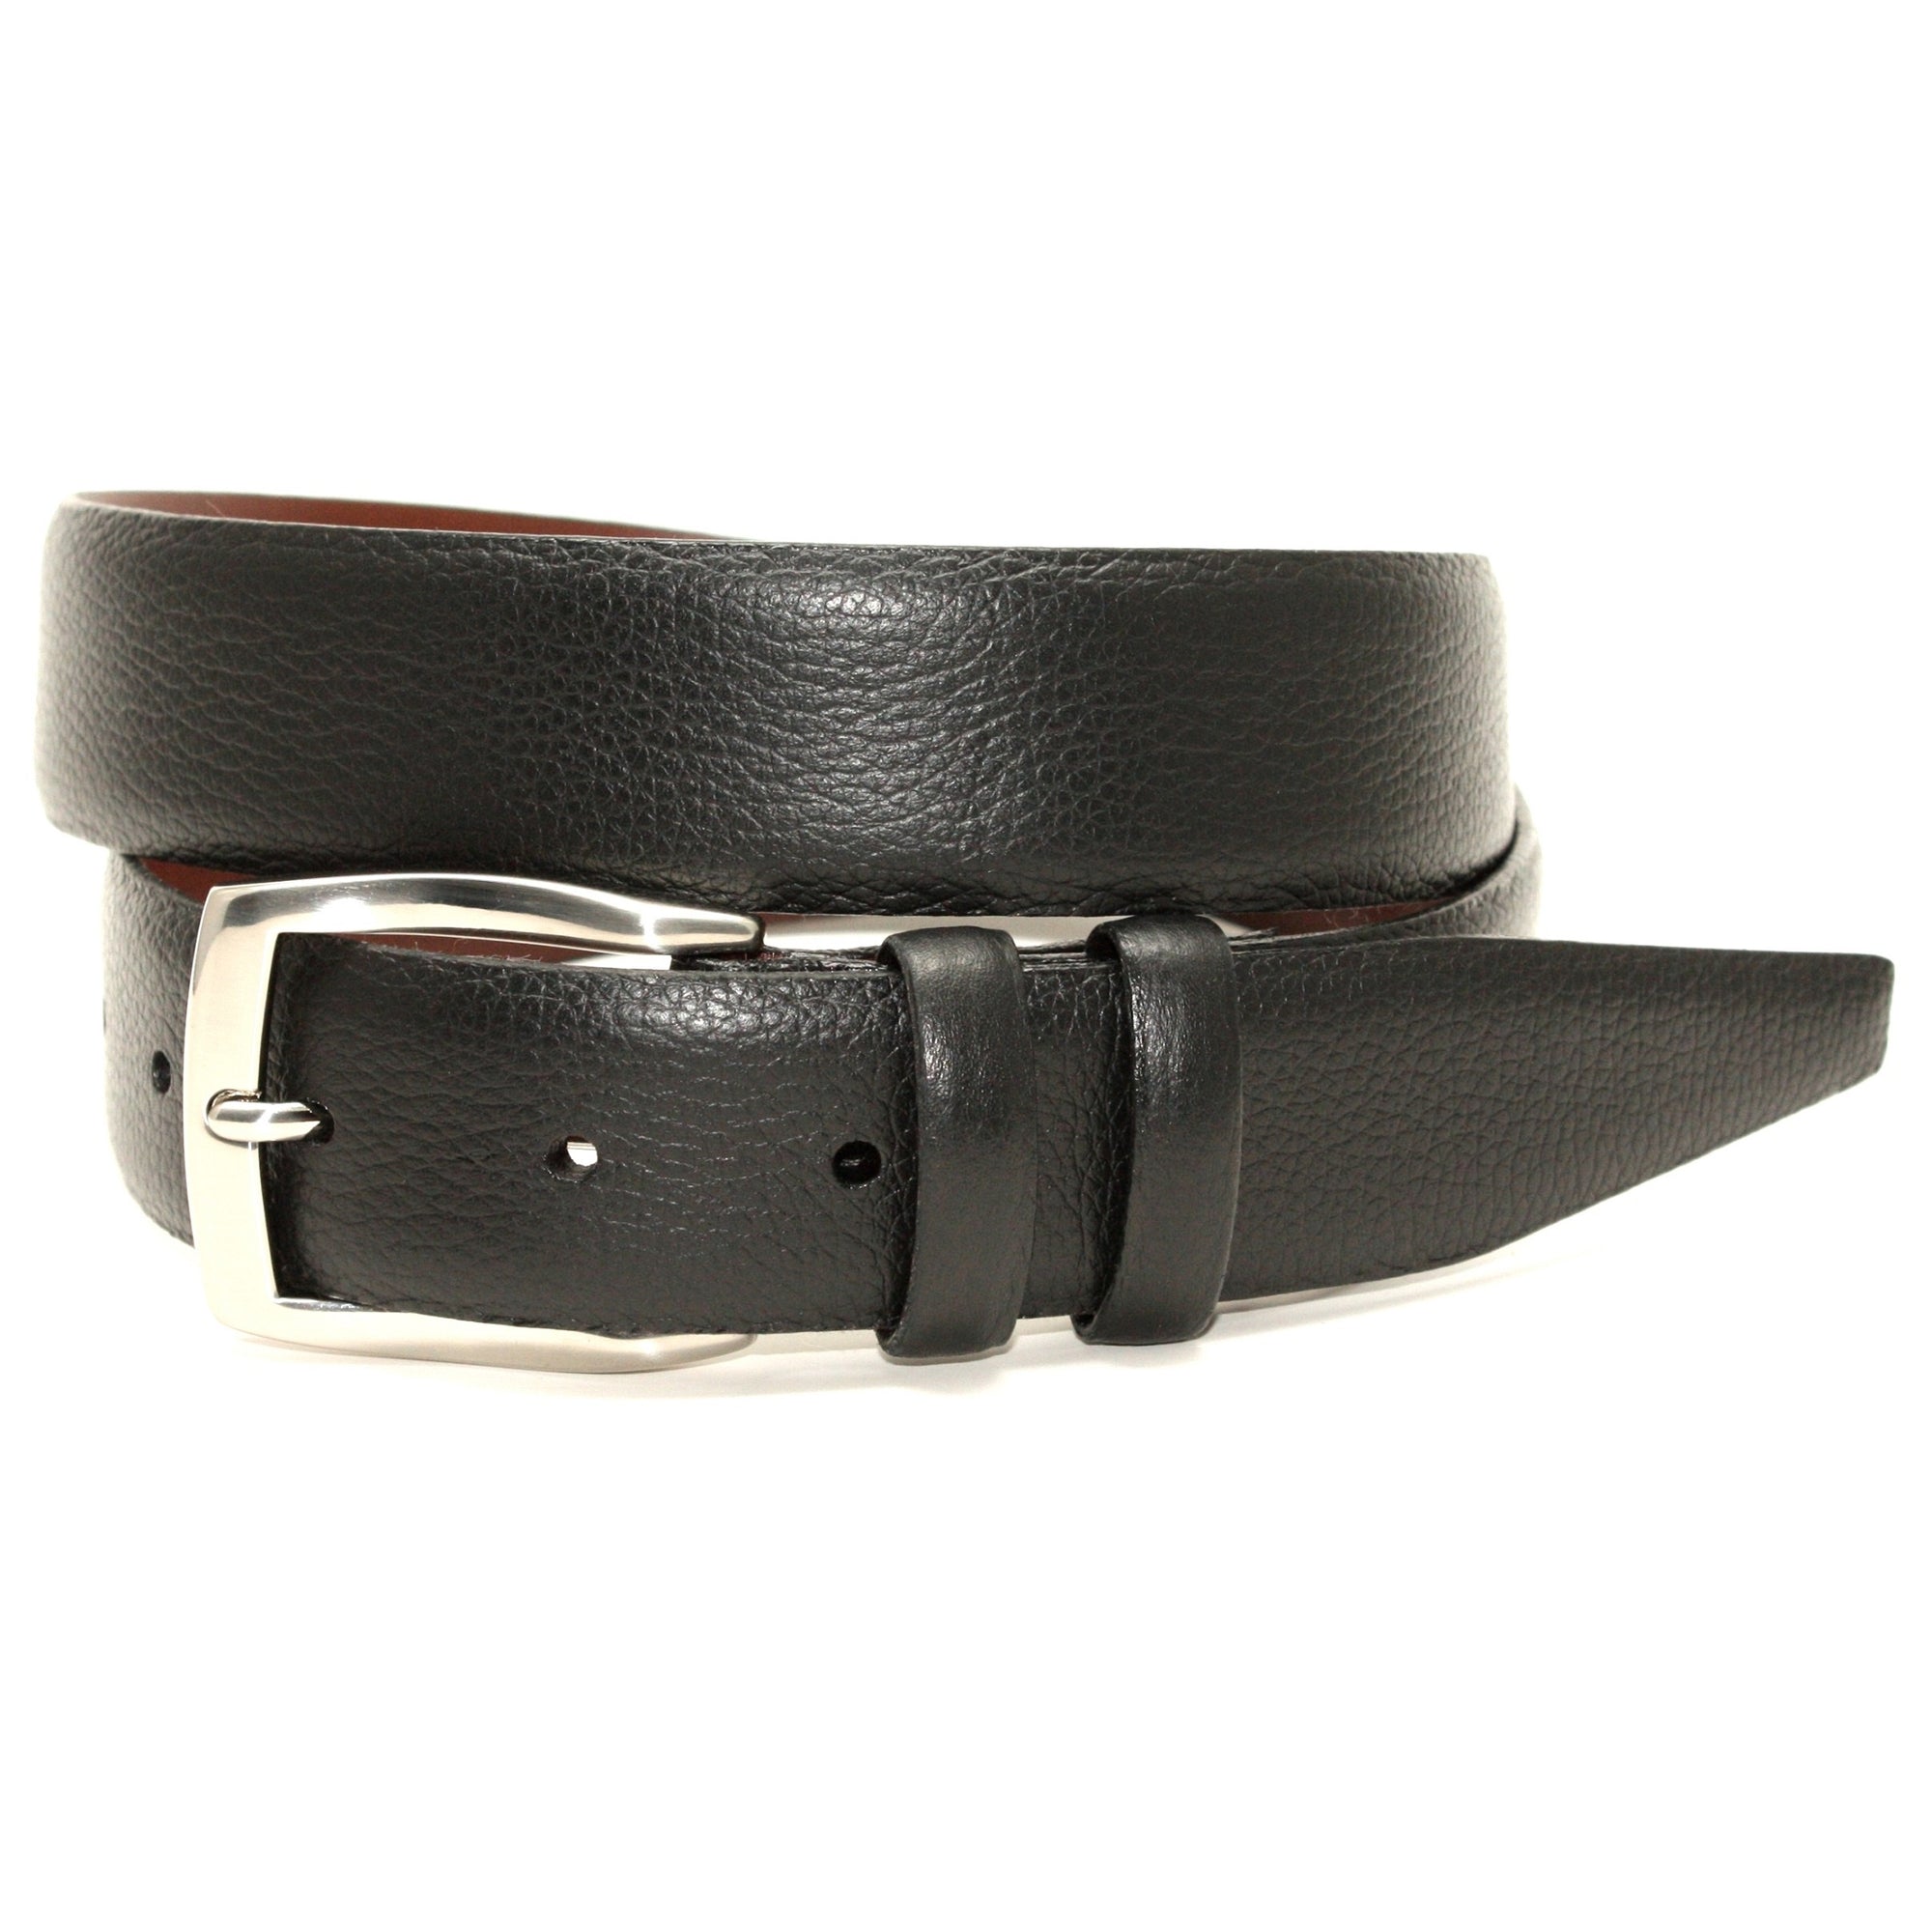 Pebble Grained Calfskin Belt in Black by Torino Leather